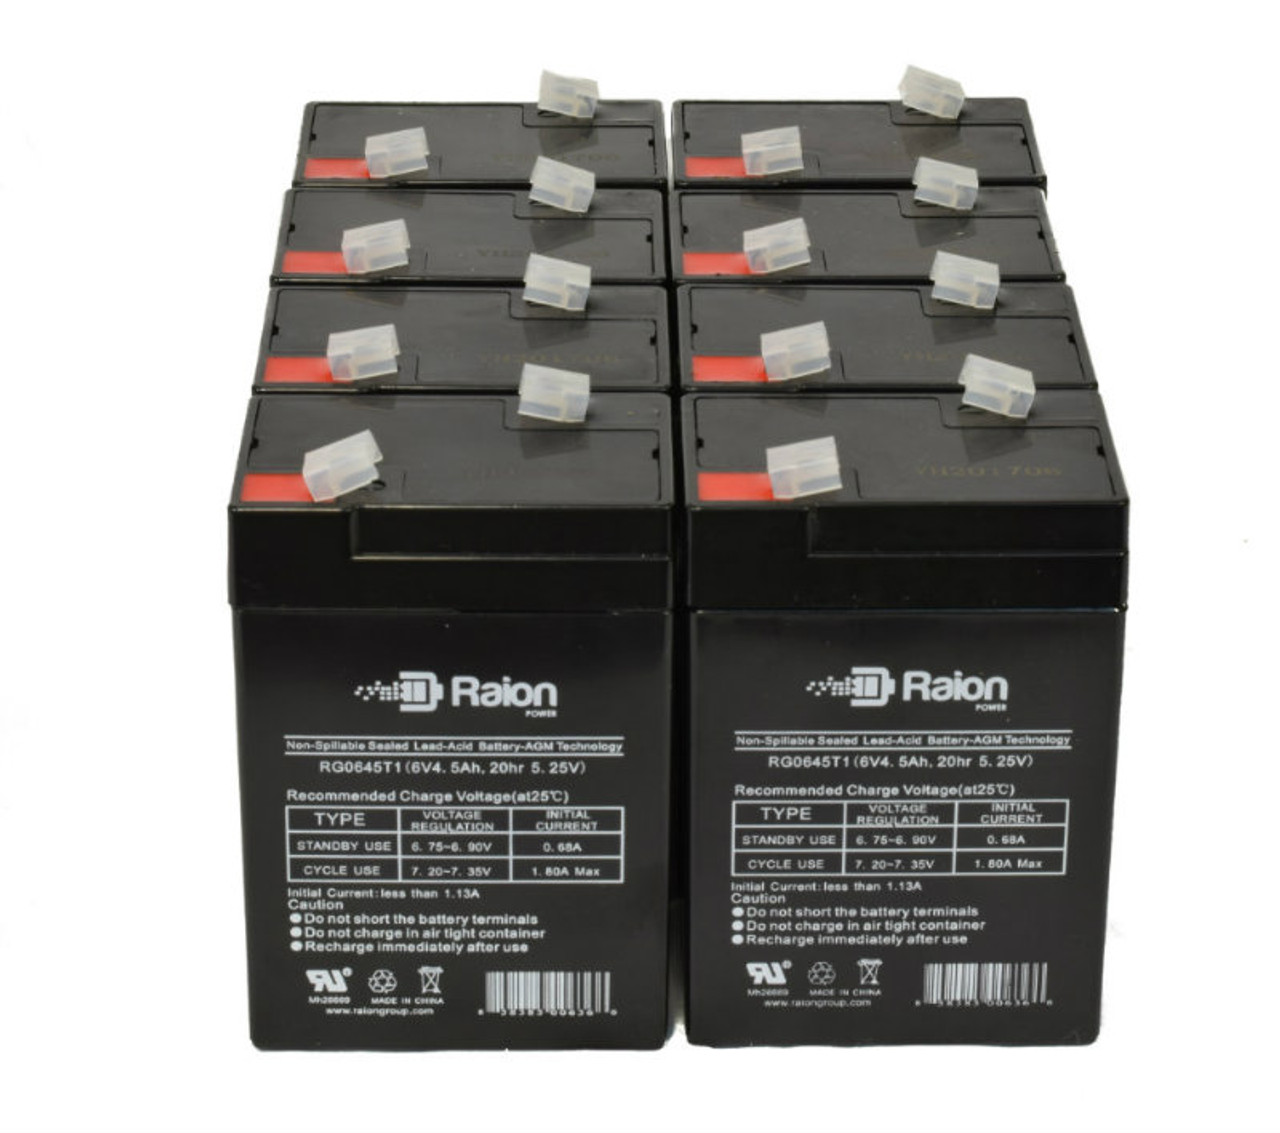 Raion Power 6 Volt 4.5Ah RG0645T1 Replacement Battery for Kung Long WP4-6V0 - 8 Pack